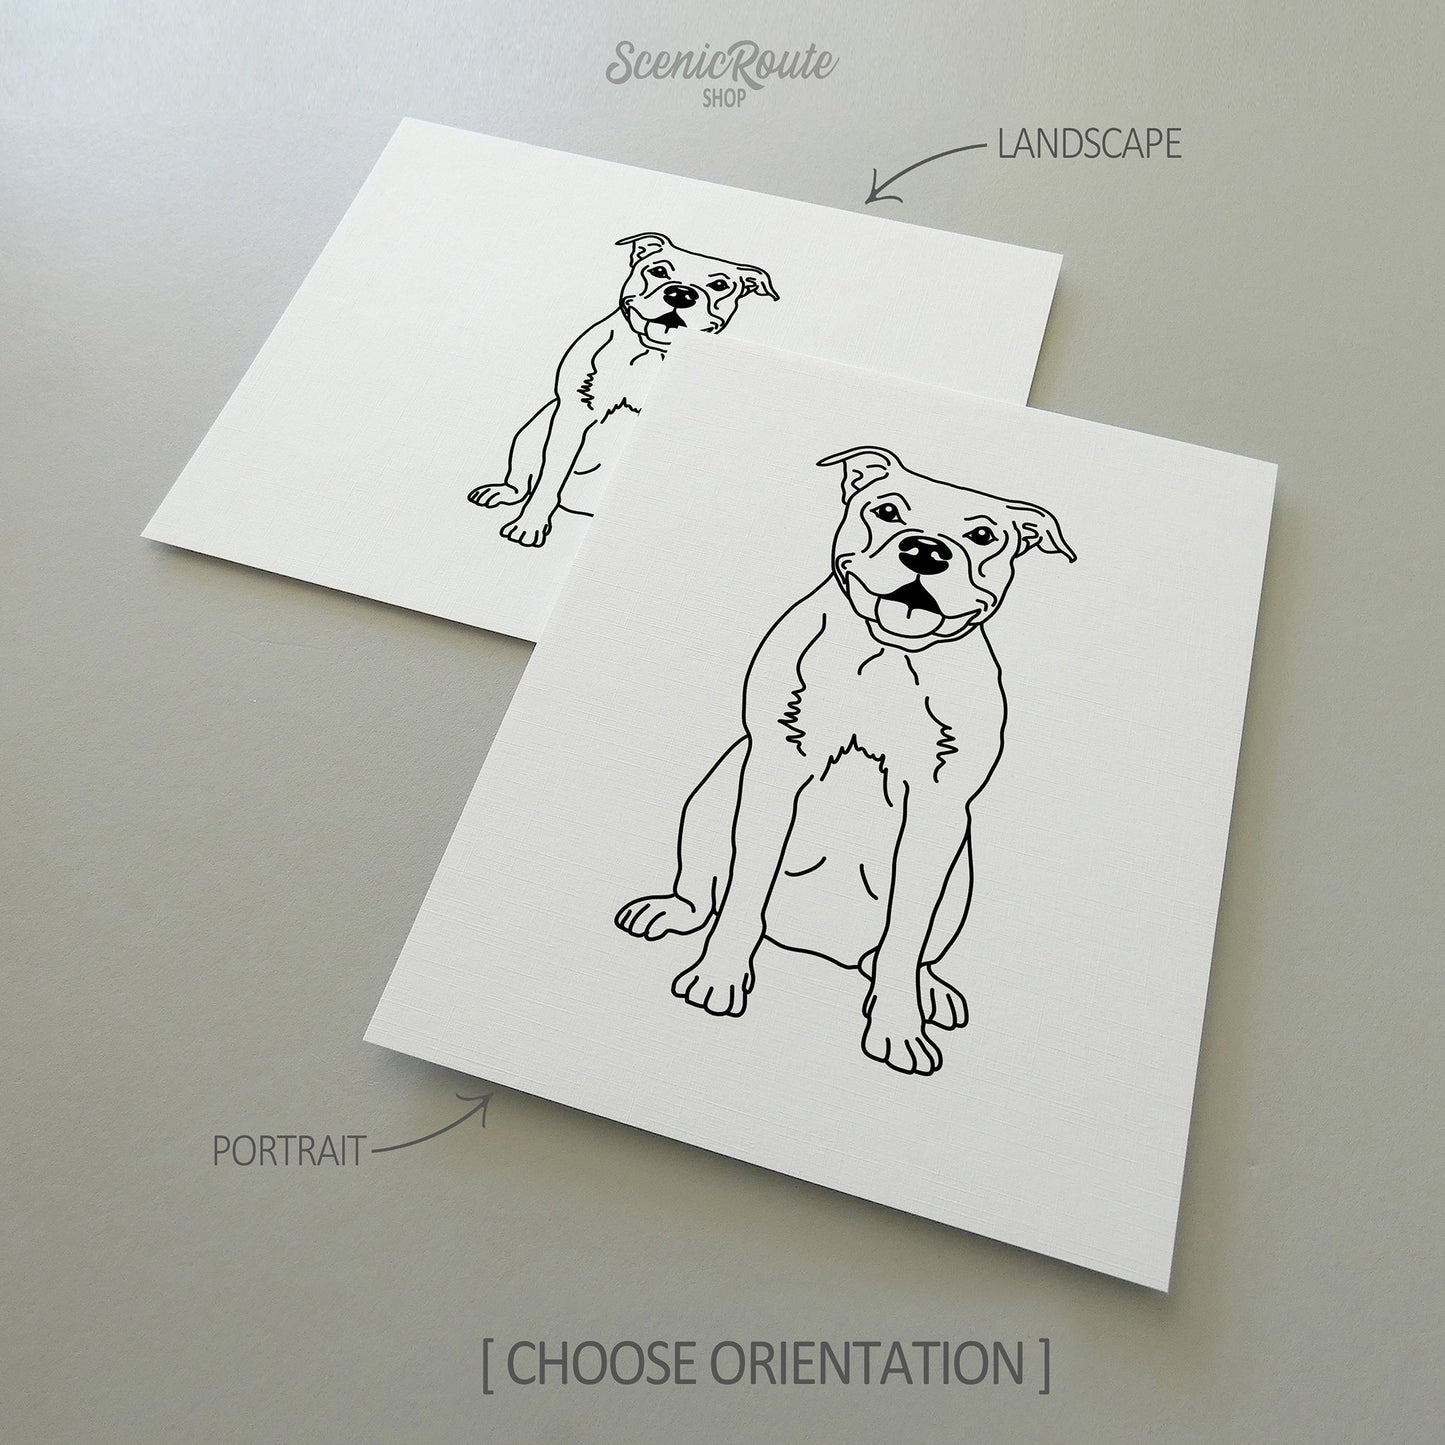 Two line art drawings of a Pitbull dog on white linen paper with a gray background.  The pieces are shown in portrait and landscape orientation for the available art print options.